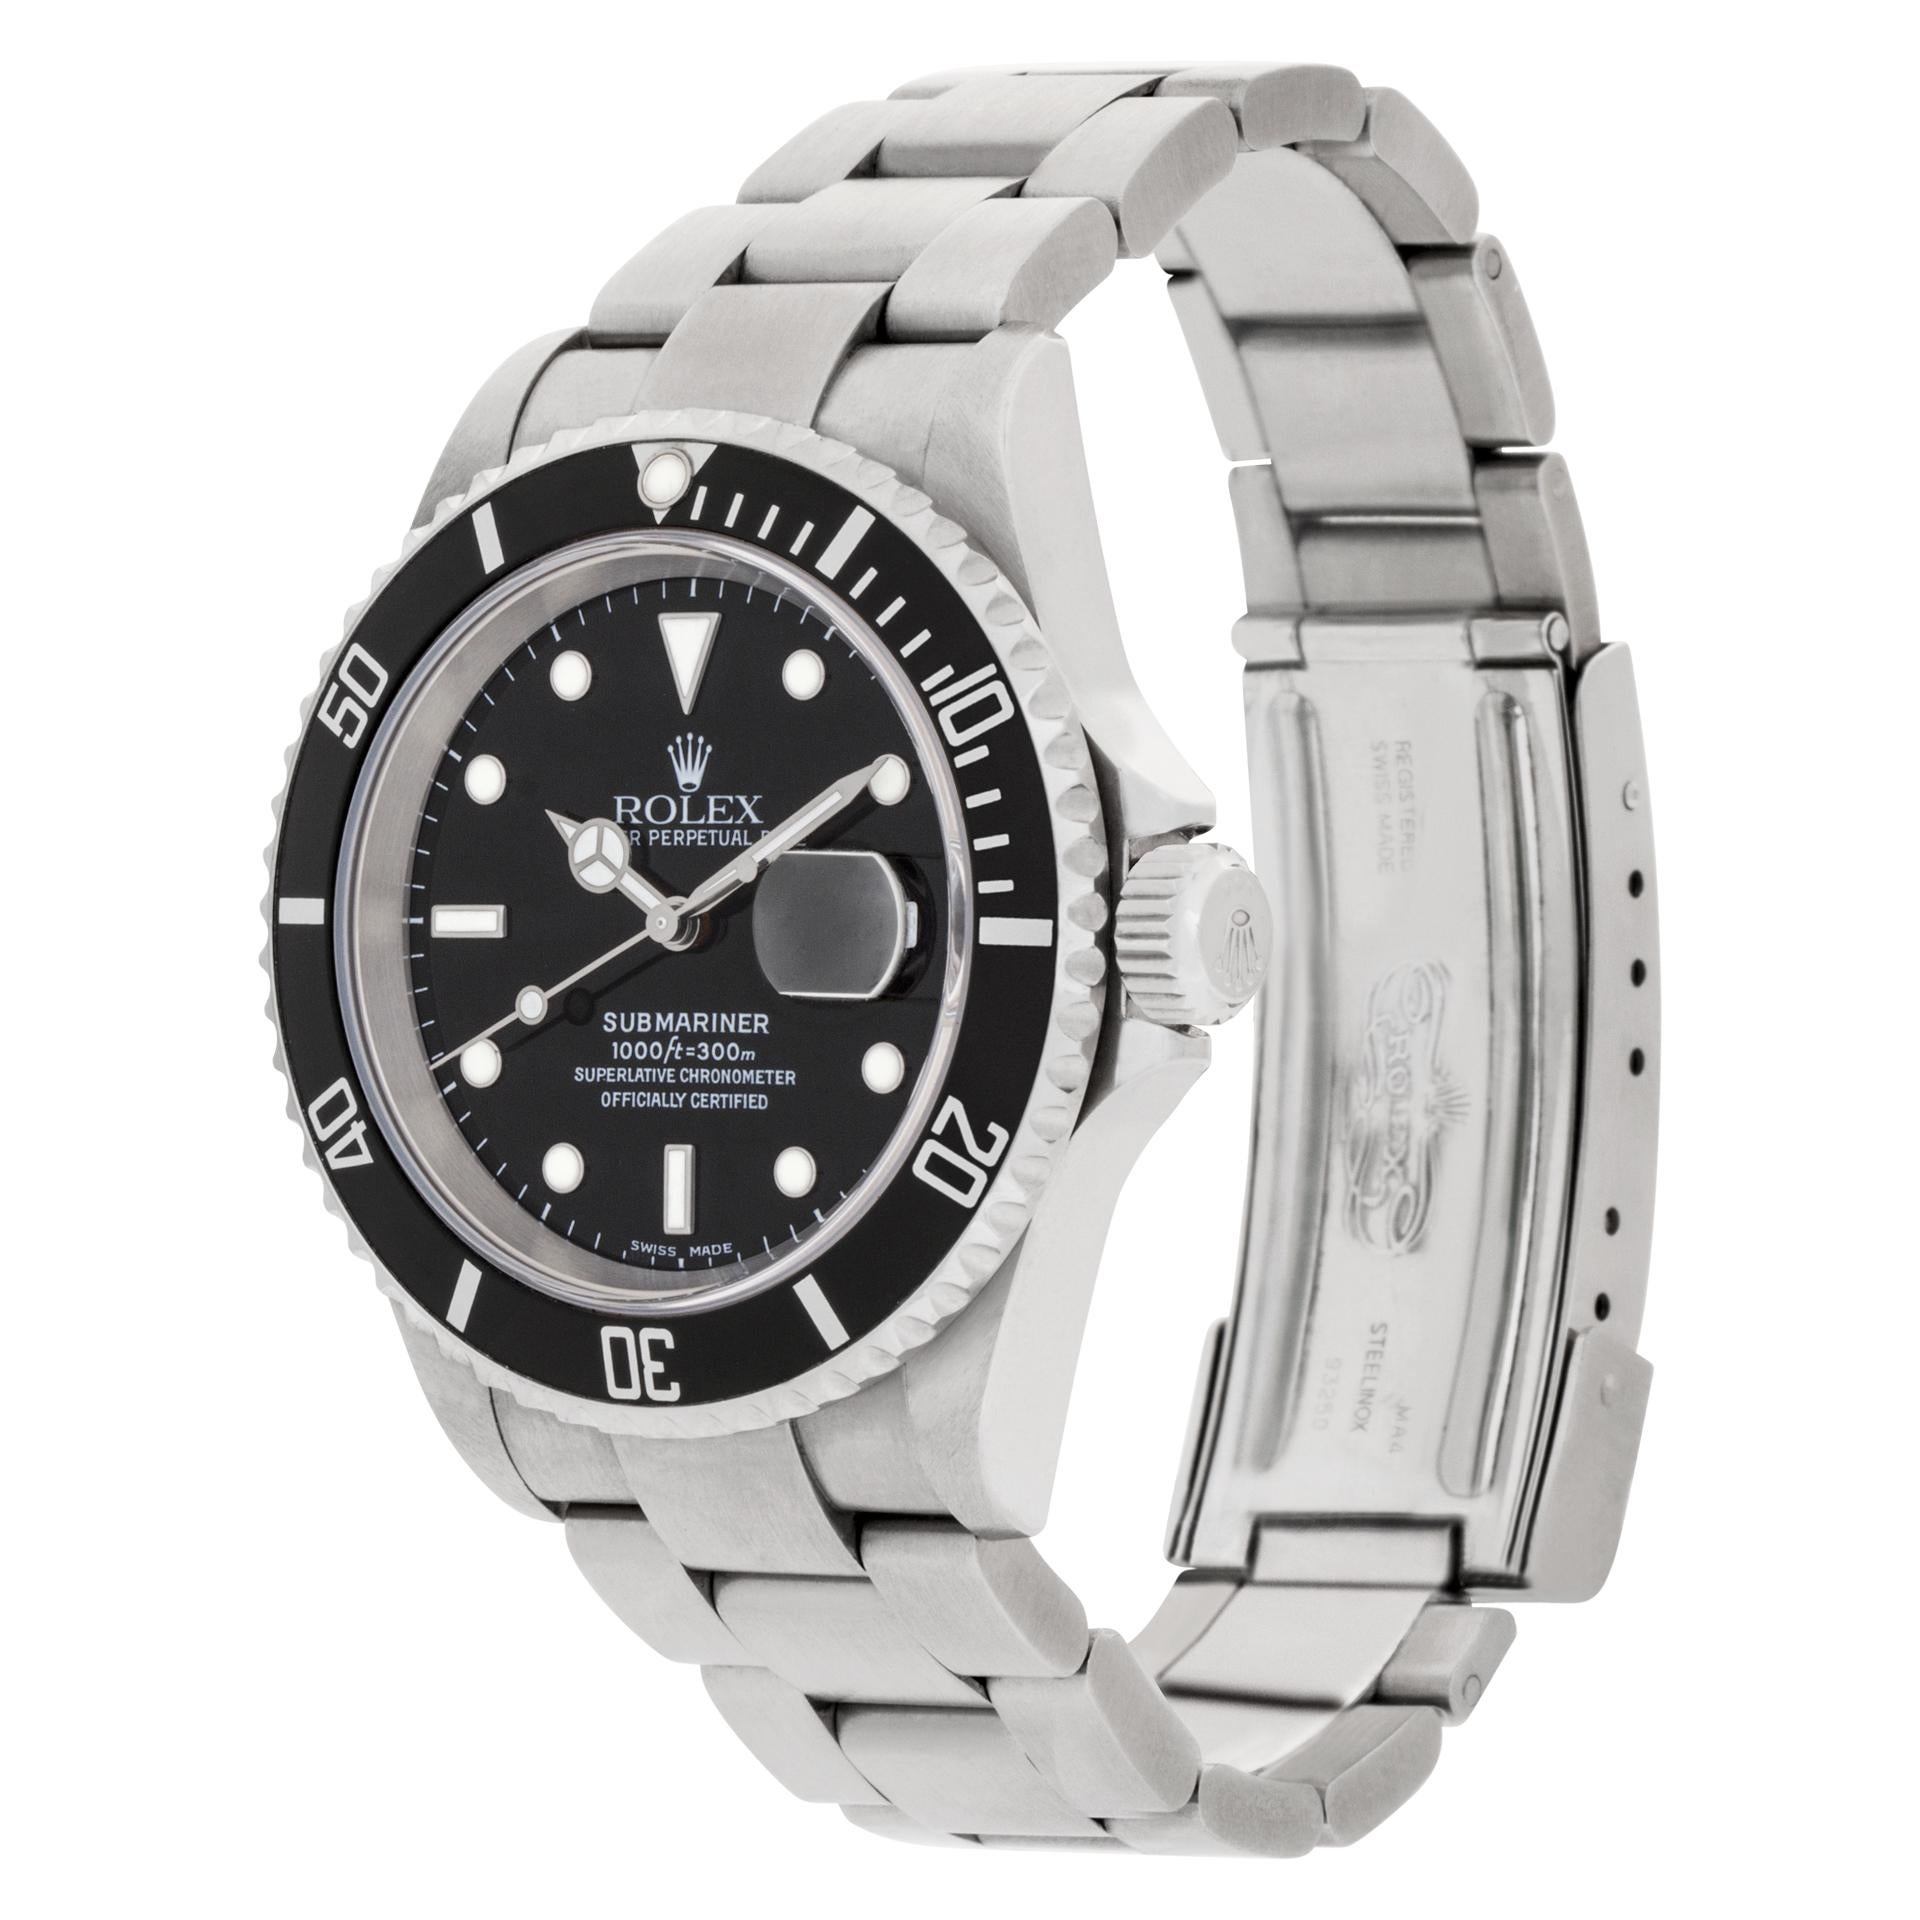 Rolex Submariner in stainless steel. Auto w/ sweep seconds and date. With papers. 40mm case size. Ref 16610. Circa 2005. **Bank Wire Only at this price** Fine Pre-owned Rolex Watch.

Certified preowned Sport Rolex Submariner 16610 watch is made out